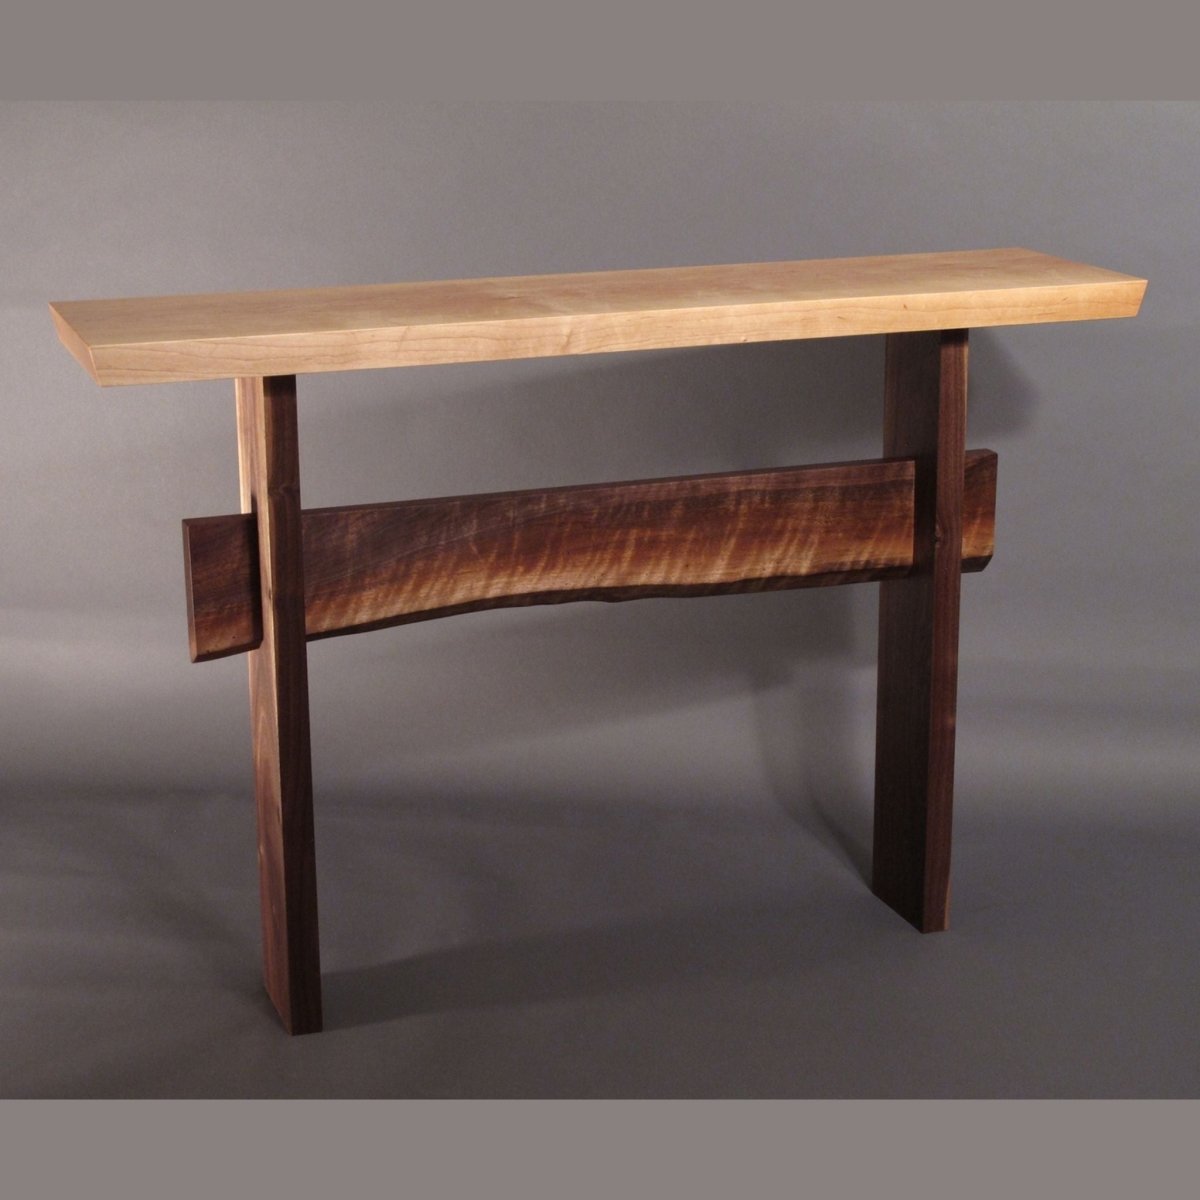 a hallway console table with live edge table stretcher by Mokuzai Furniture